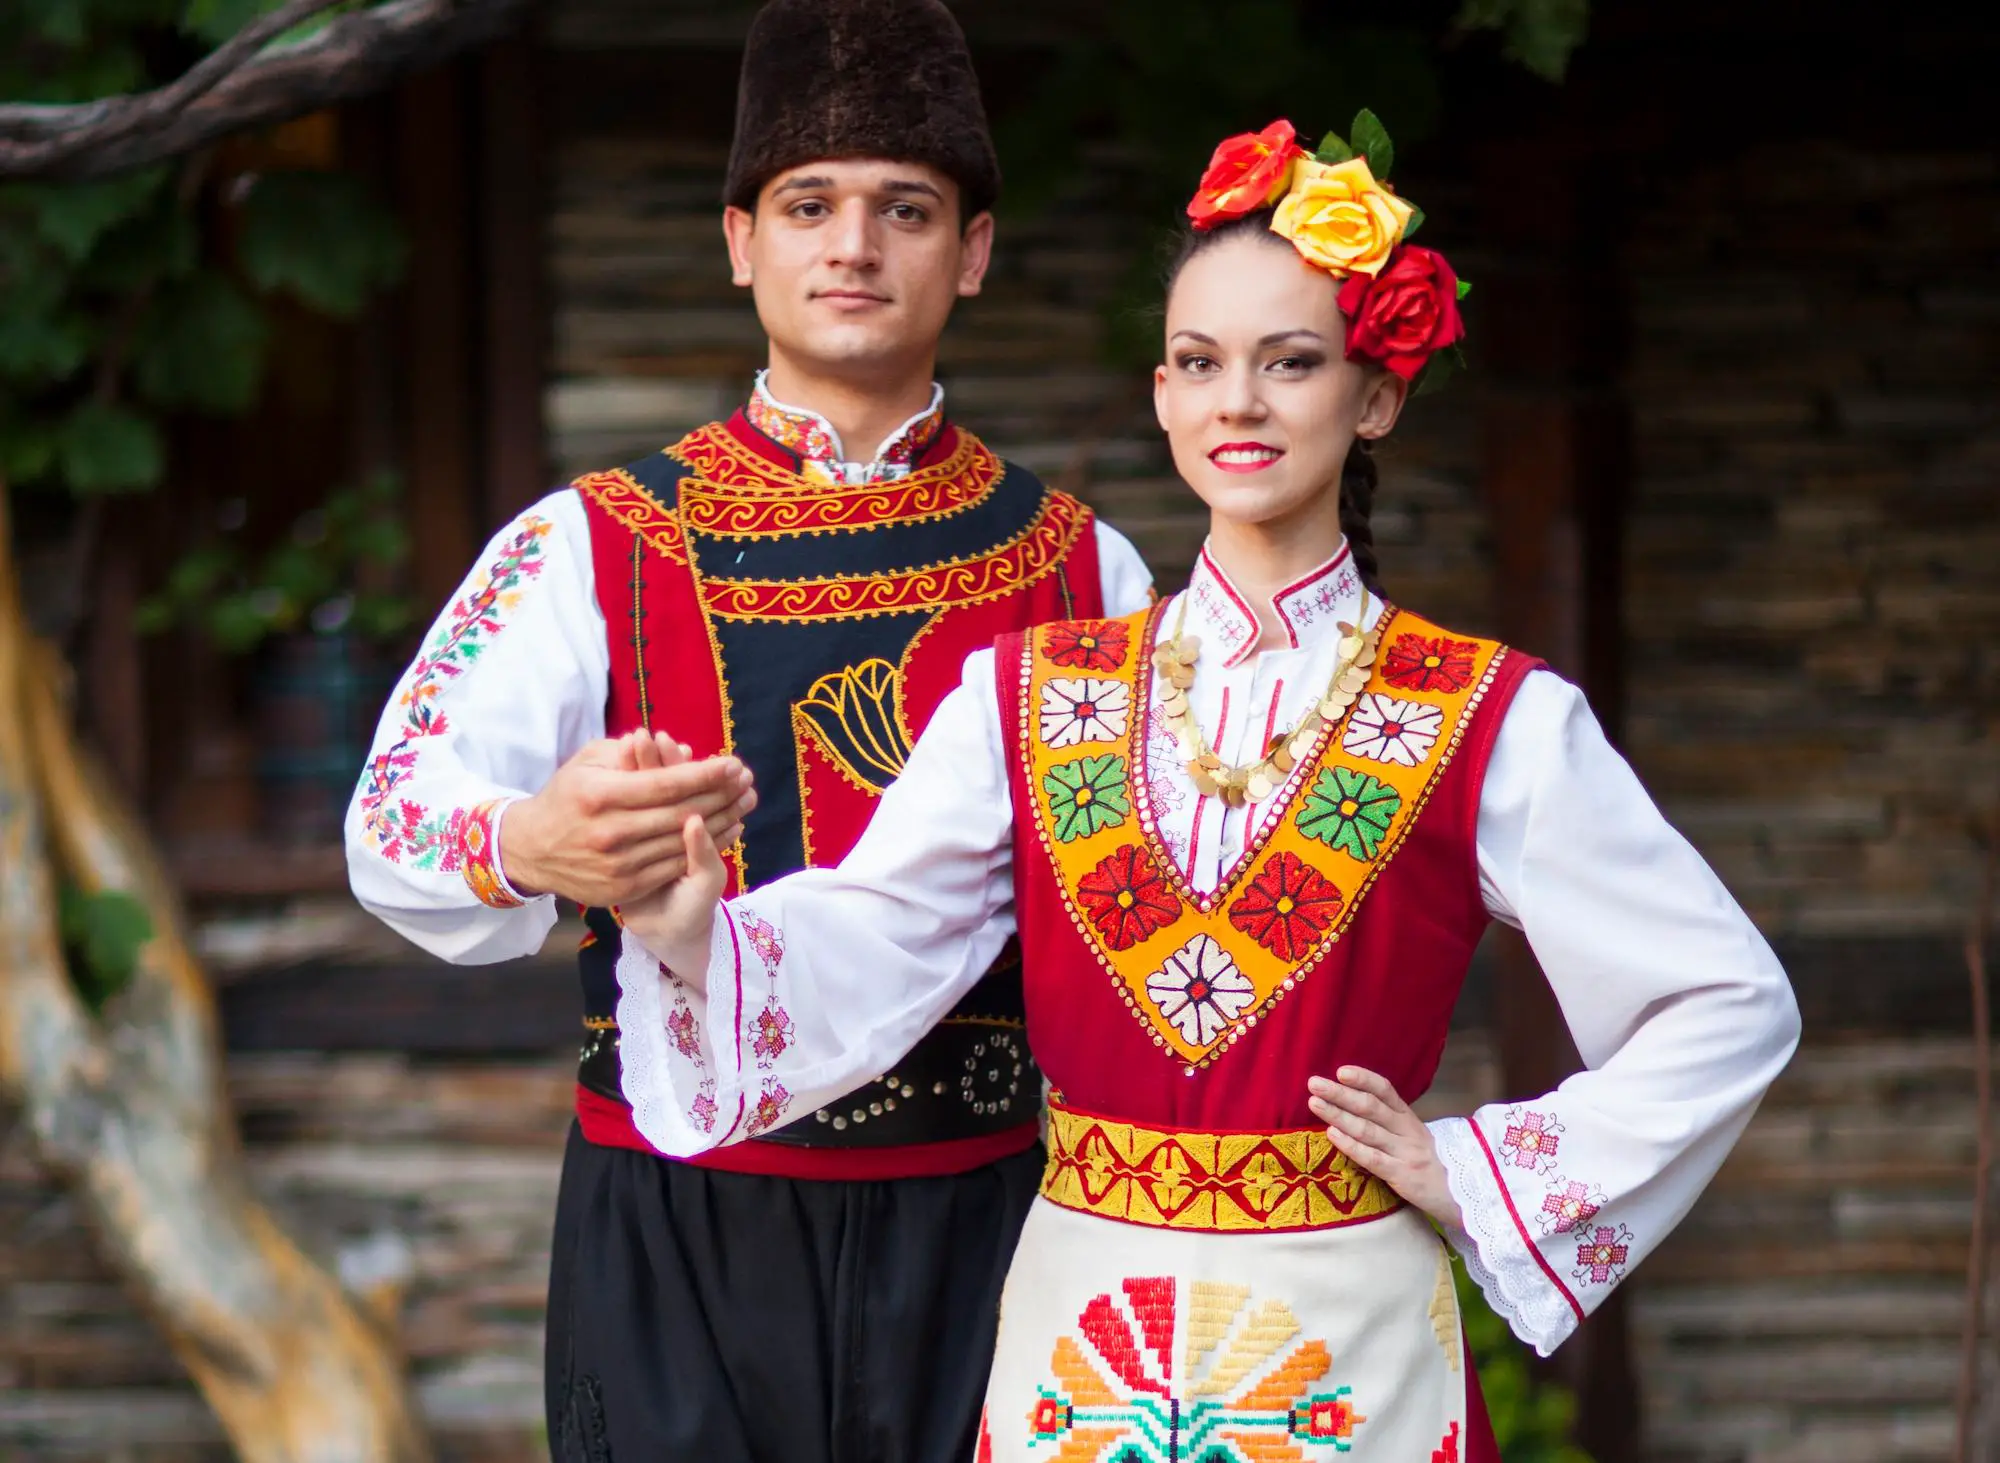 Bulgarians in traditional costume